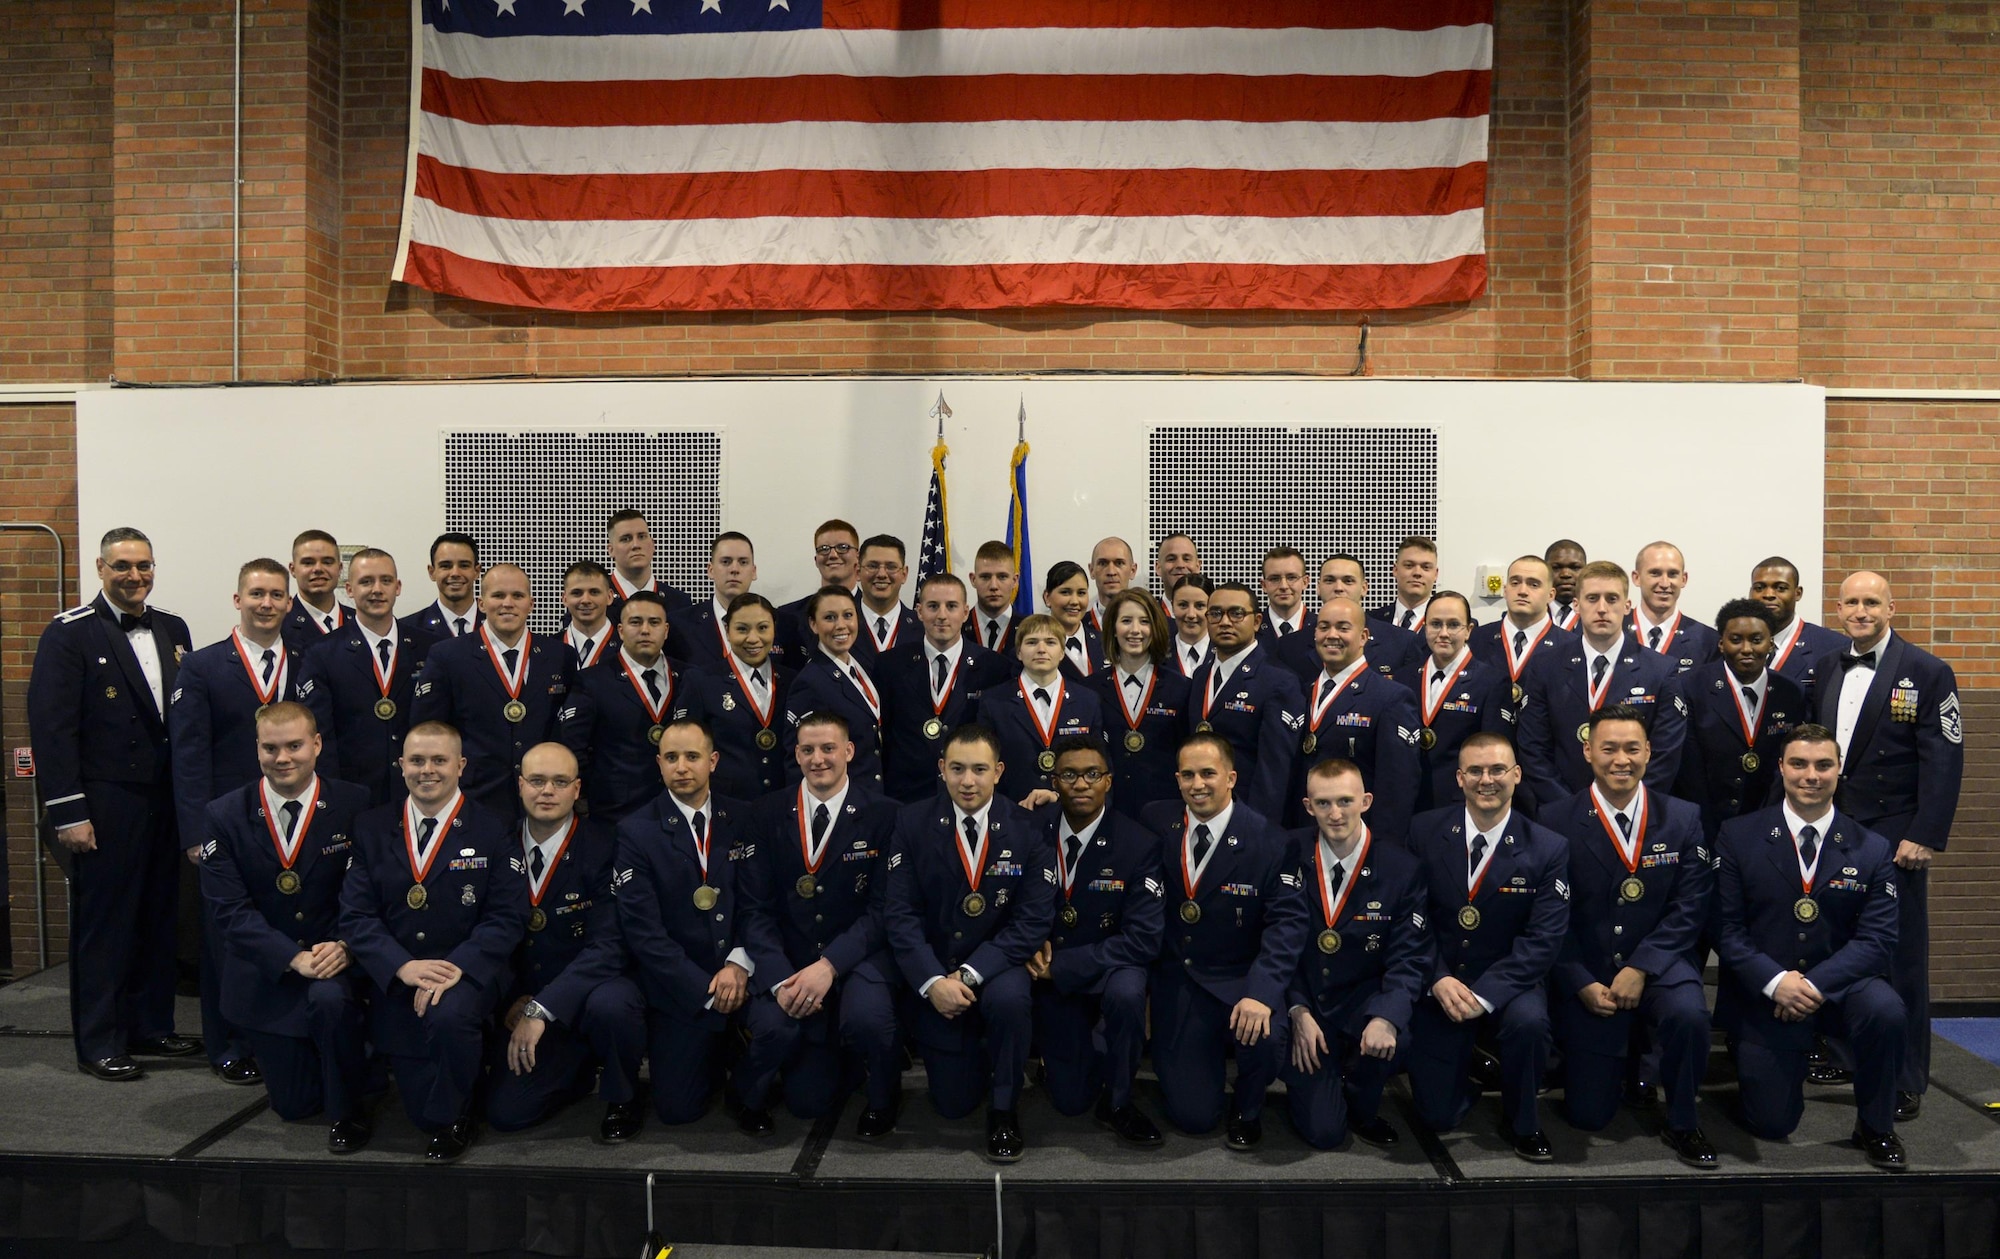 Col. Stephen Kravitsky, 90th Missile Wing commander, and Chief Master Sgt. Samuel Couch, 90th Missile Wing command chief, pose for a photograph with the graduating ALS class 16-C members in the Fall Hall Community Center Feb. 17, 2016. (U.S. Air Force photo by Senior Airman Jason Wiese)